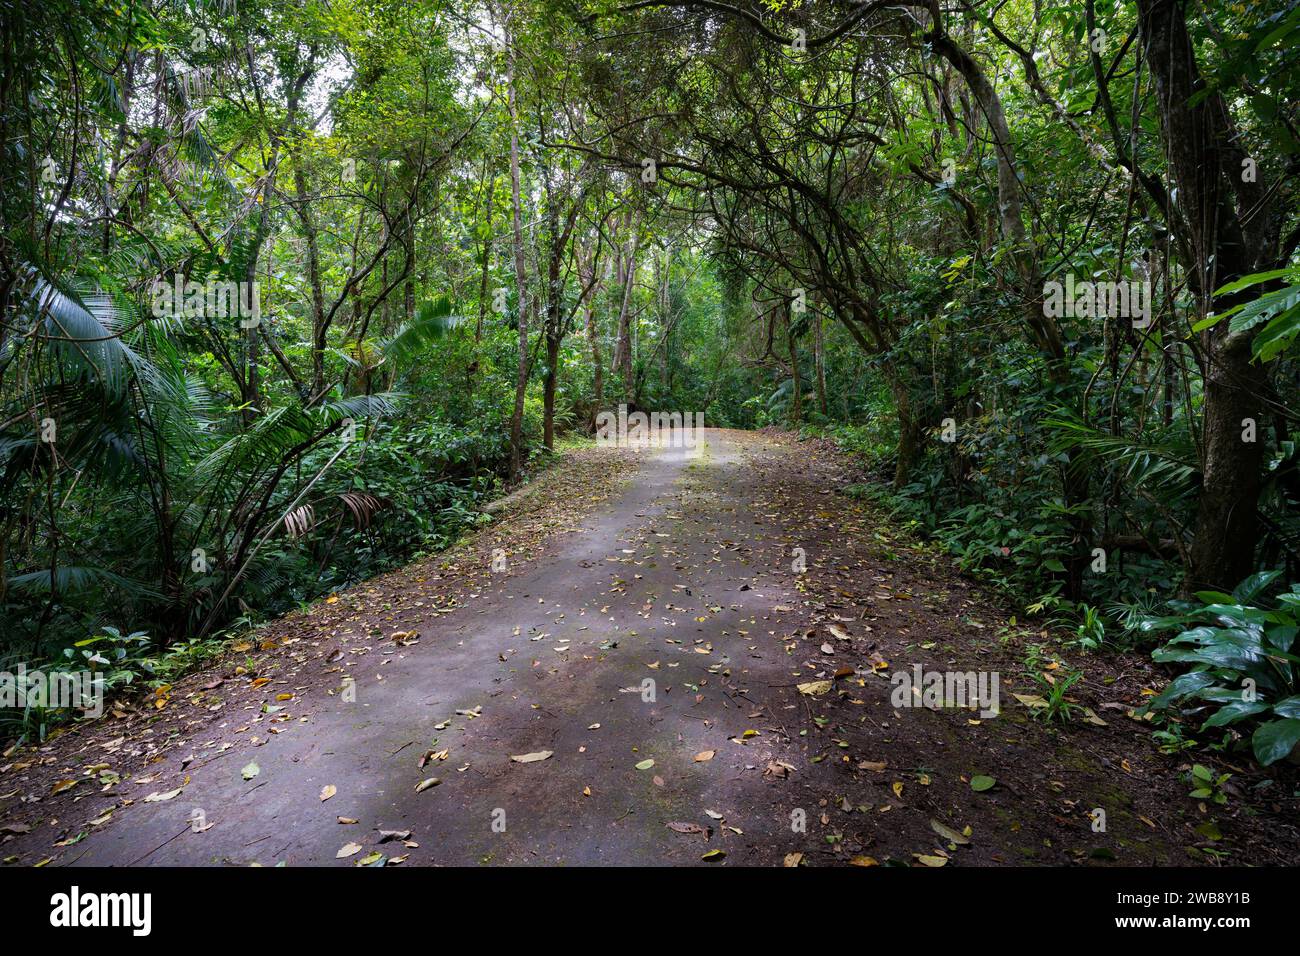 A scenic view of Mt Bandilaan National Park, Siquijor, Philippines Stock Photo